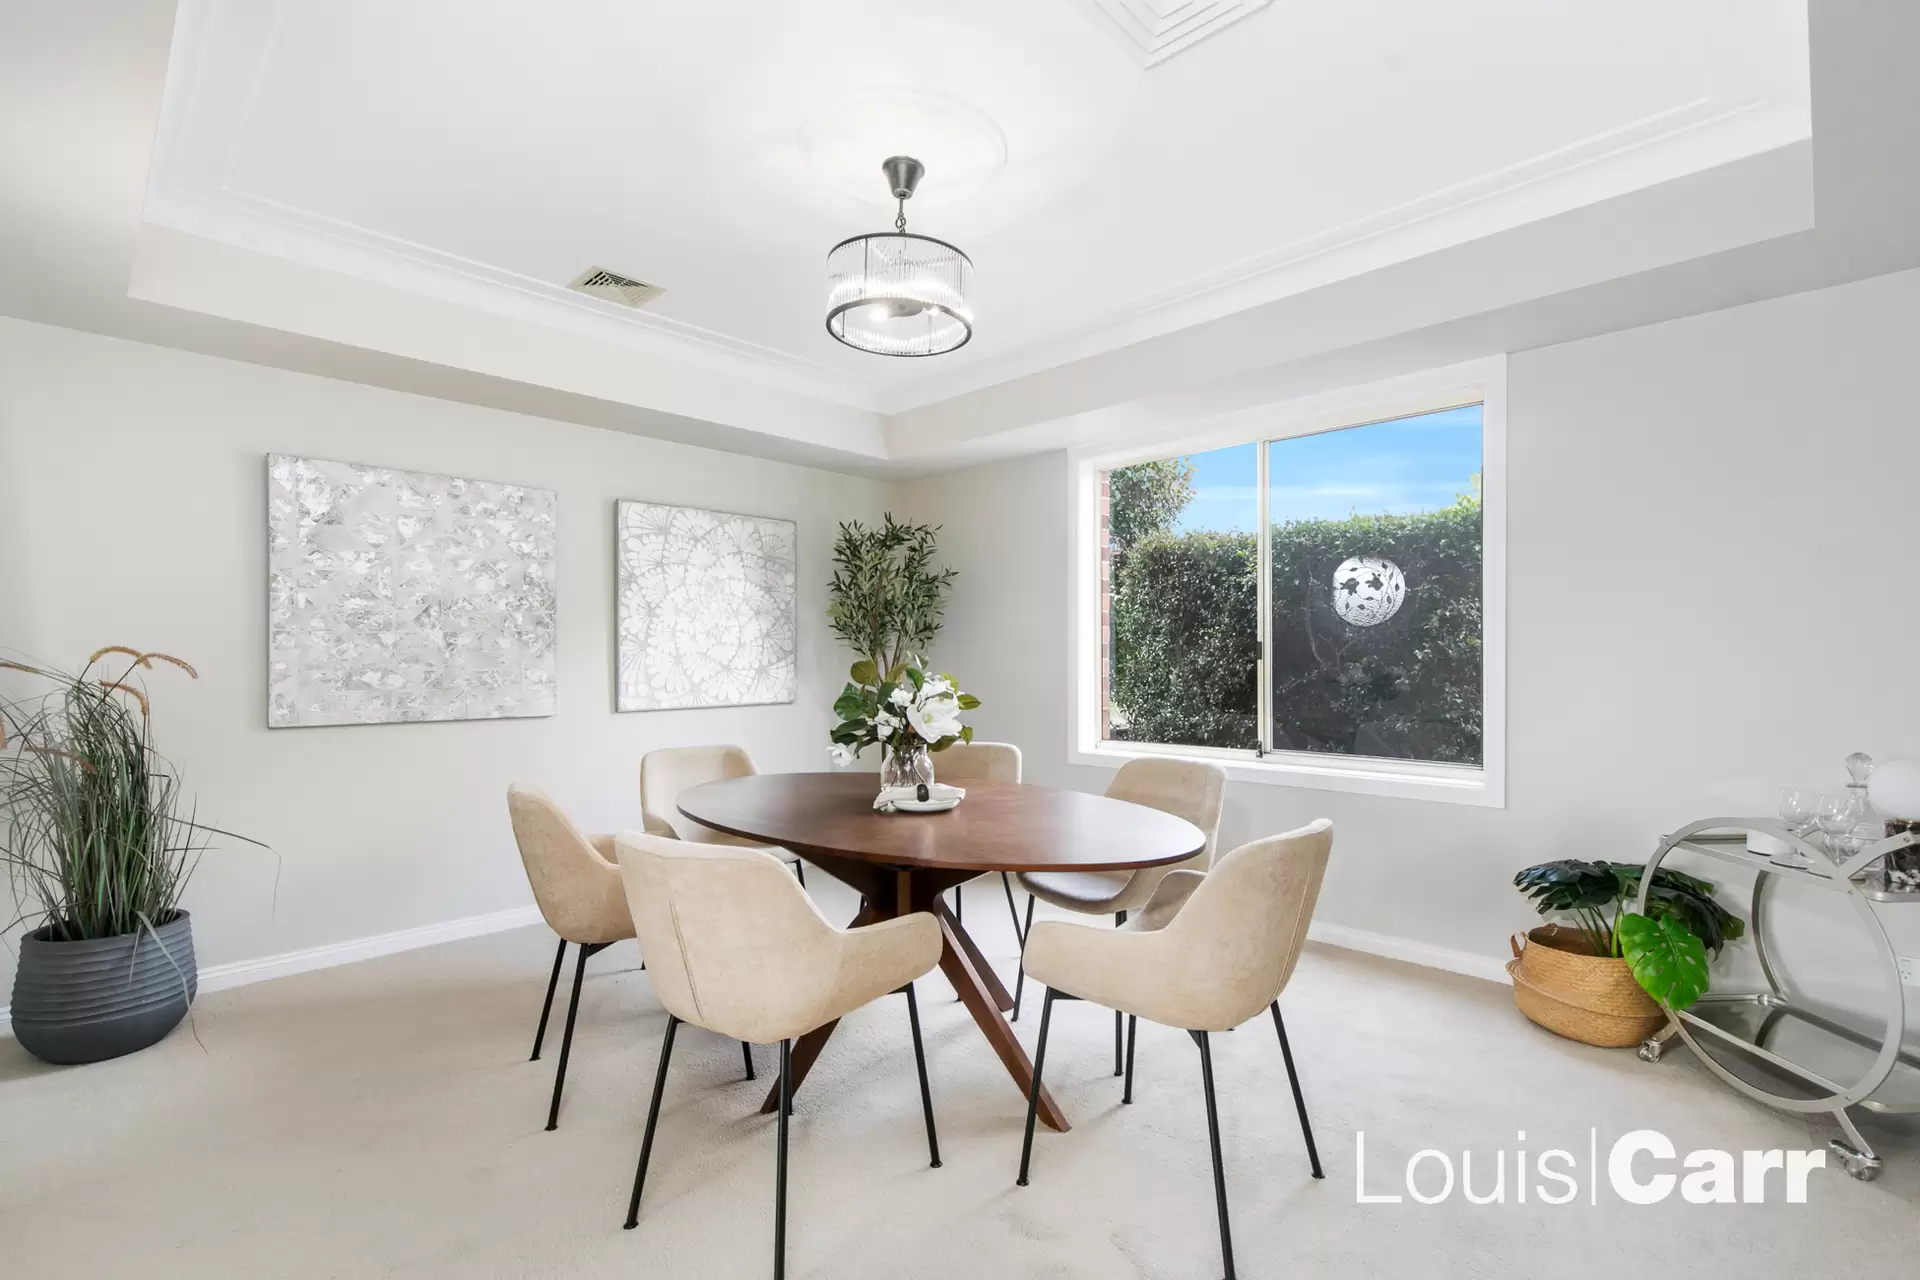 Photo #5: 16 Ellerslie Drive, West Pennant Hills - Sold by Louis Carr Real Estate